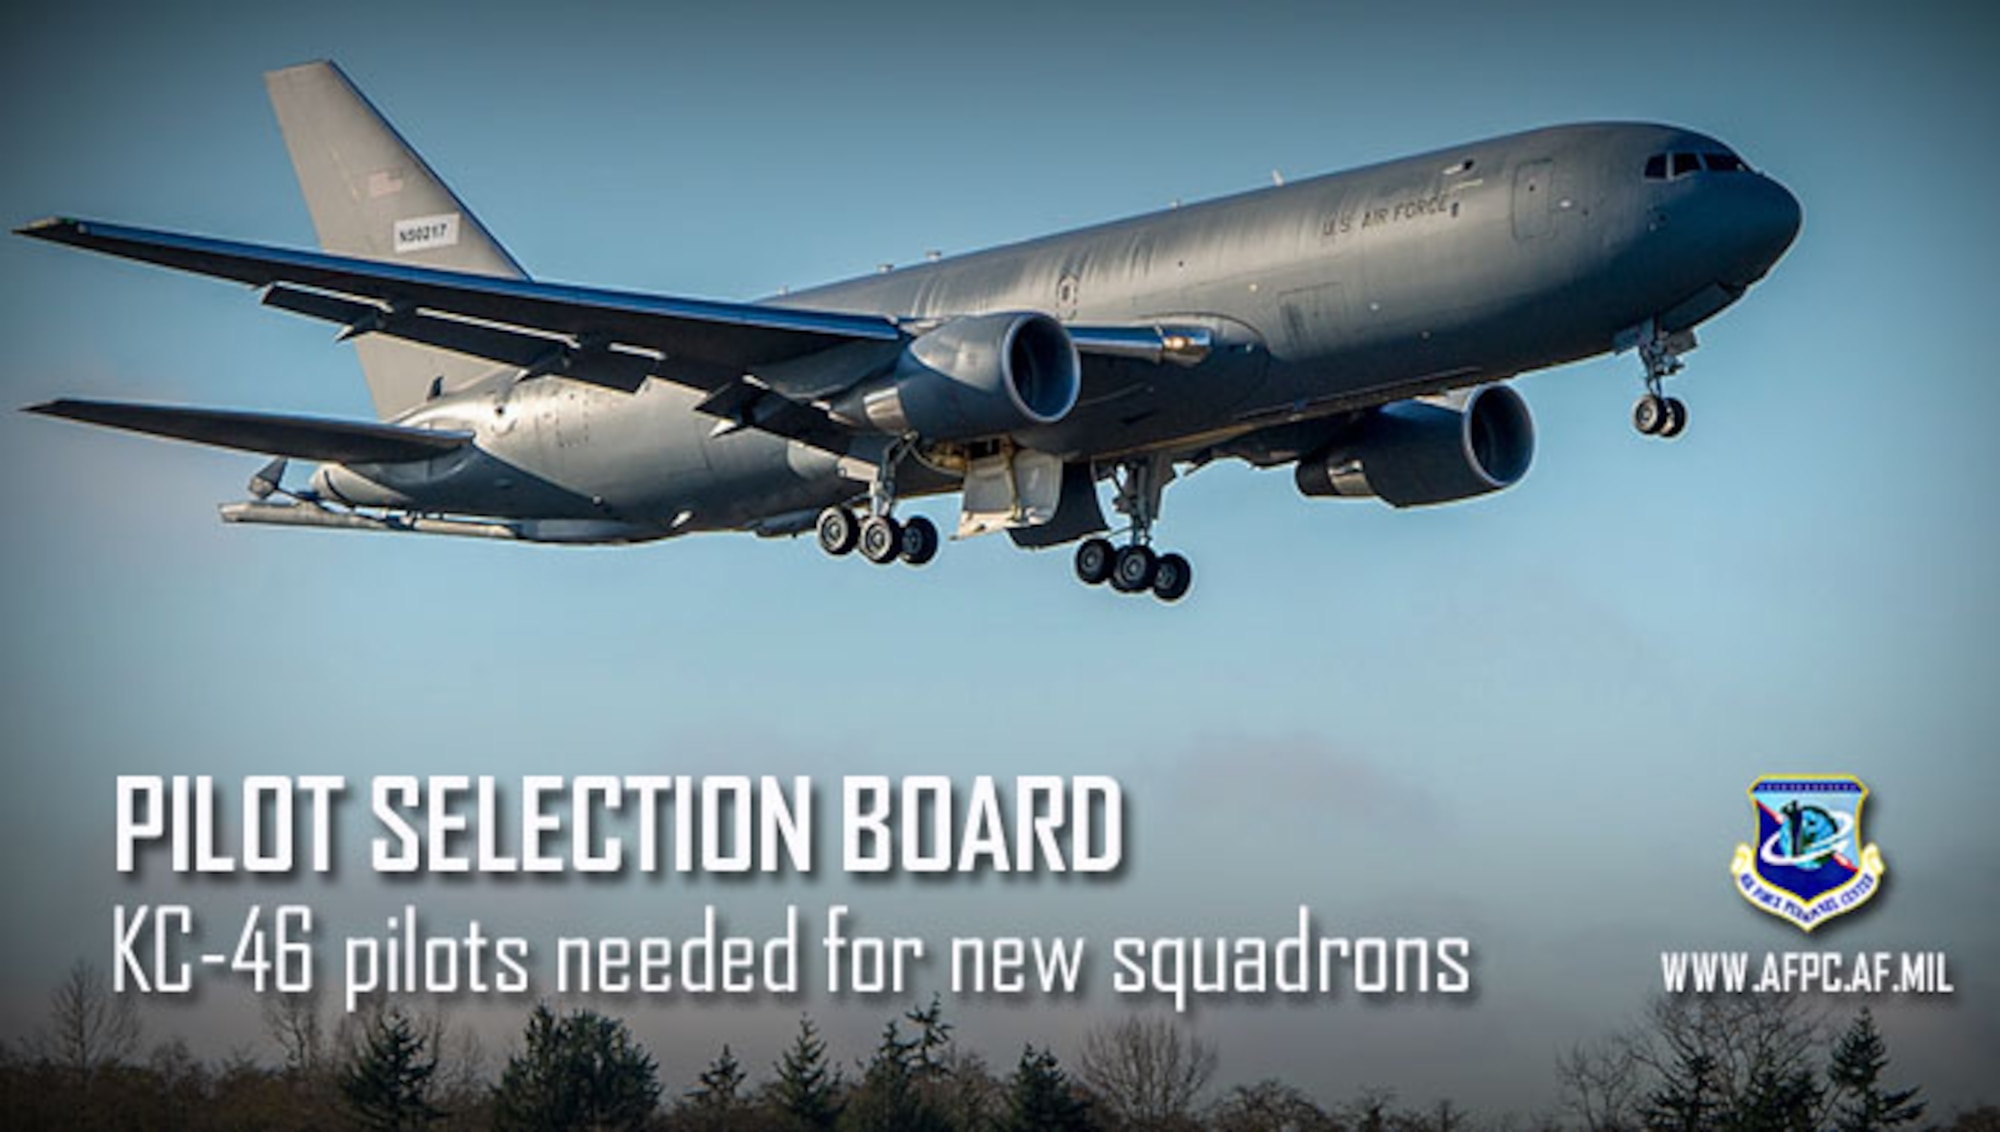 Pilot selection board; KC-46 pilots needed for new squadrons